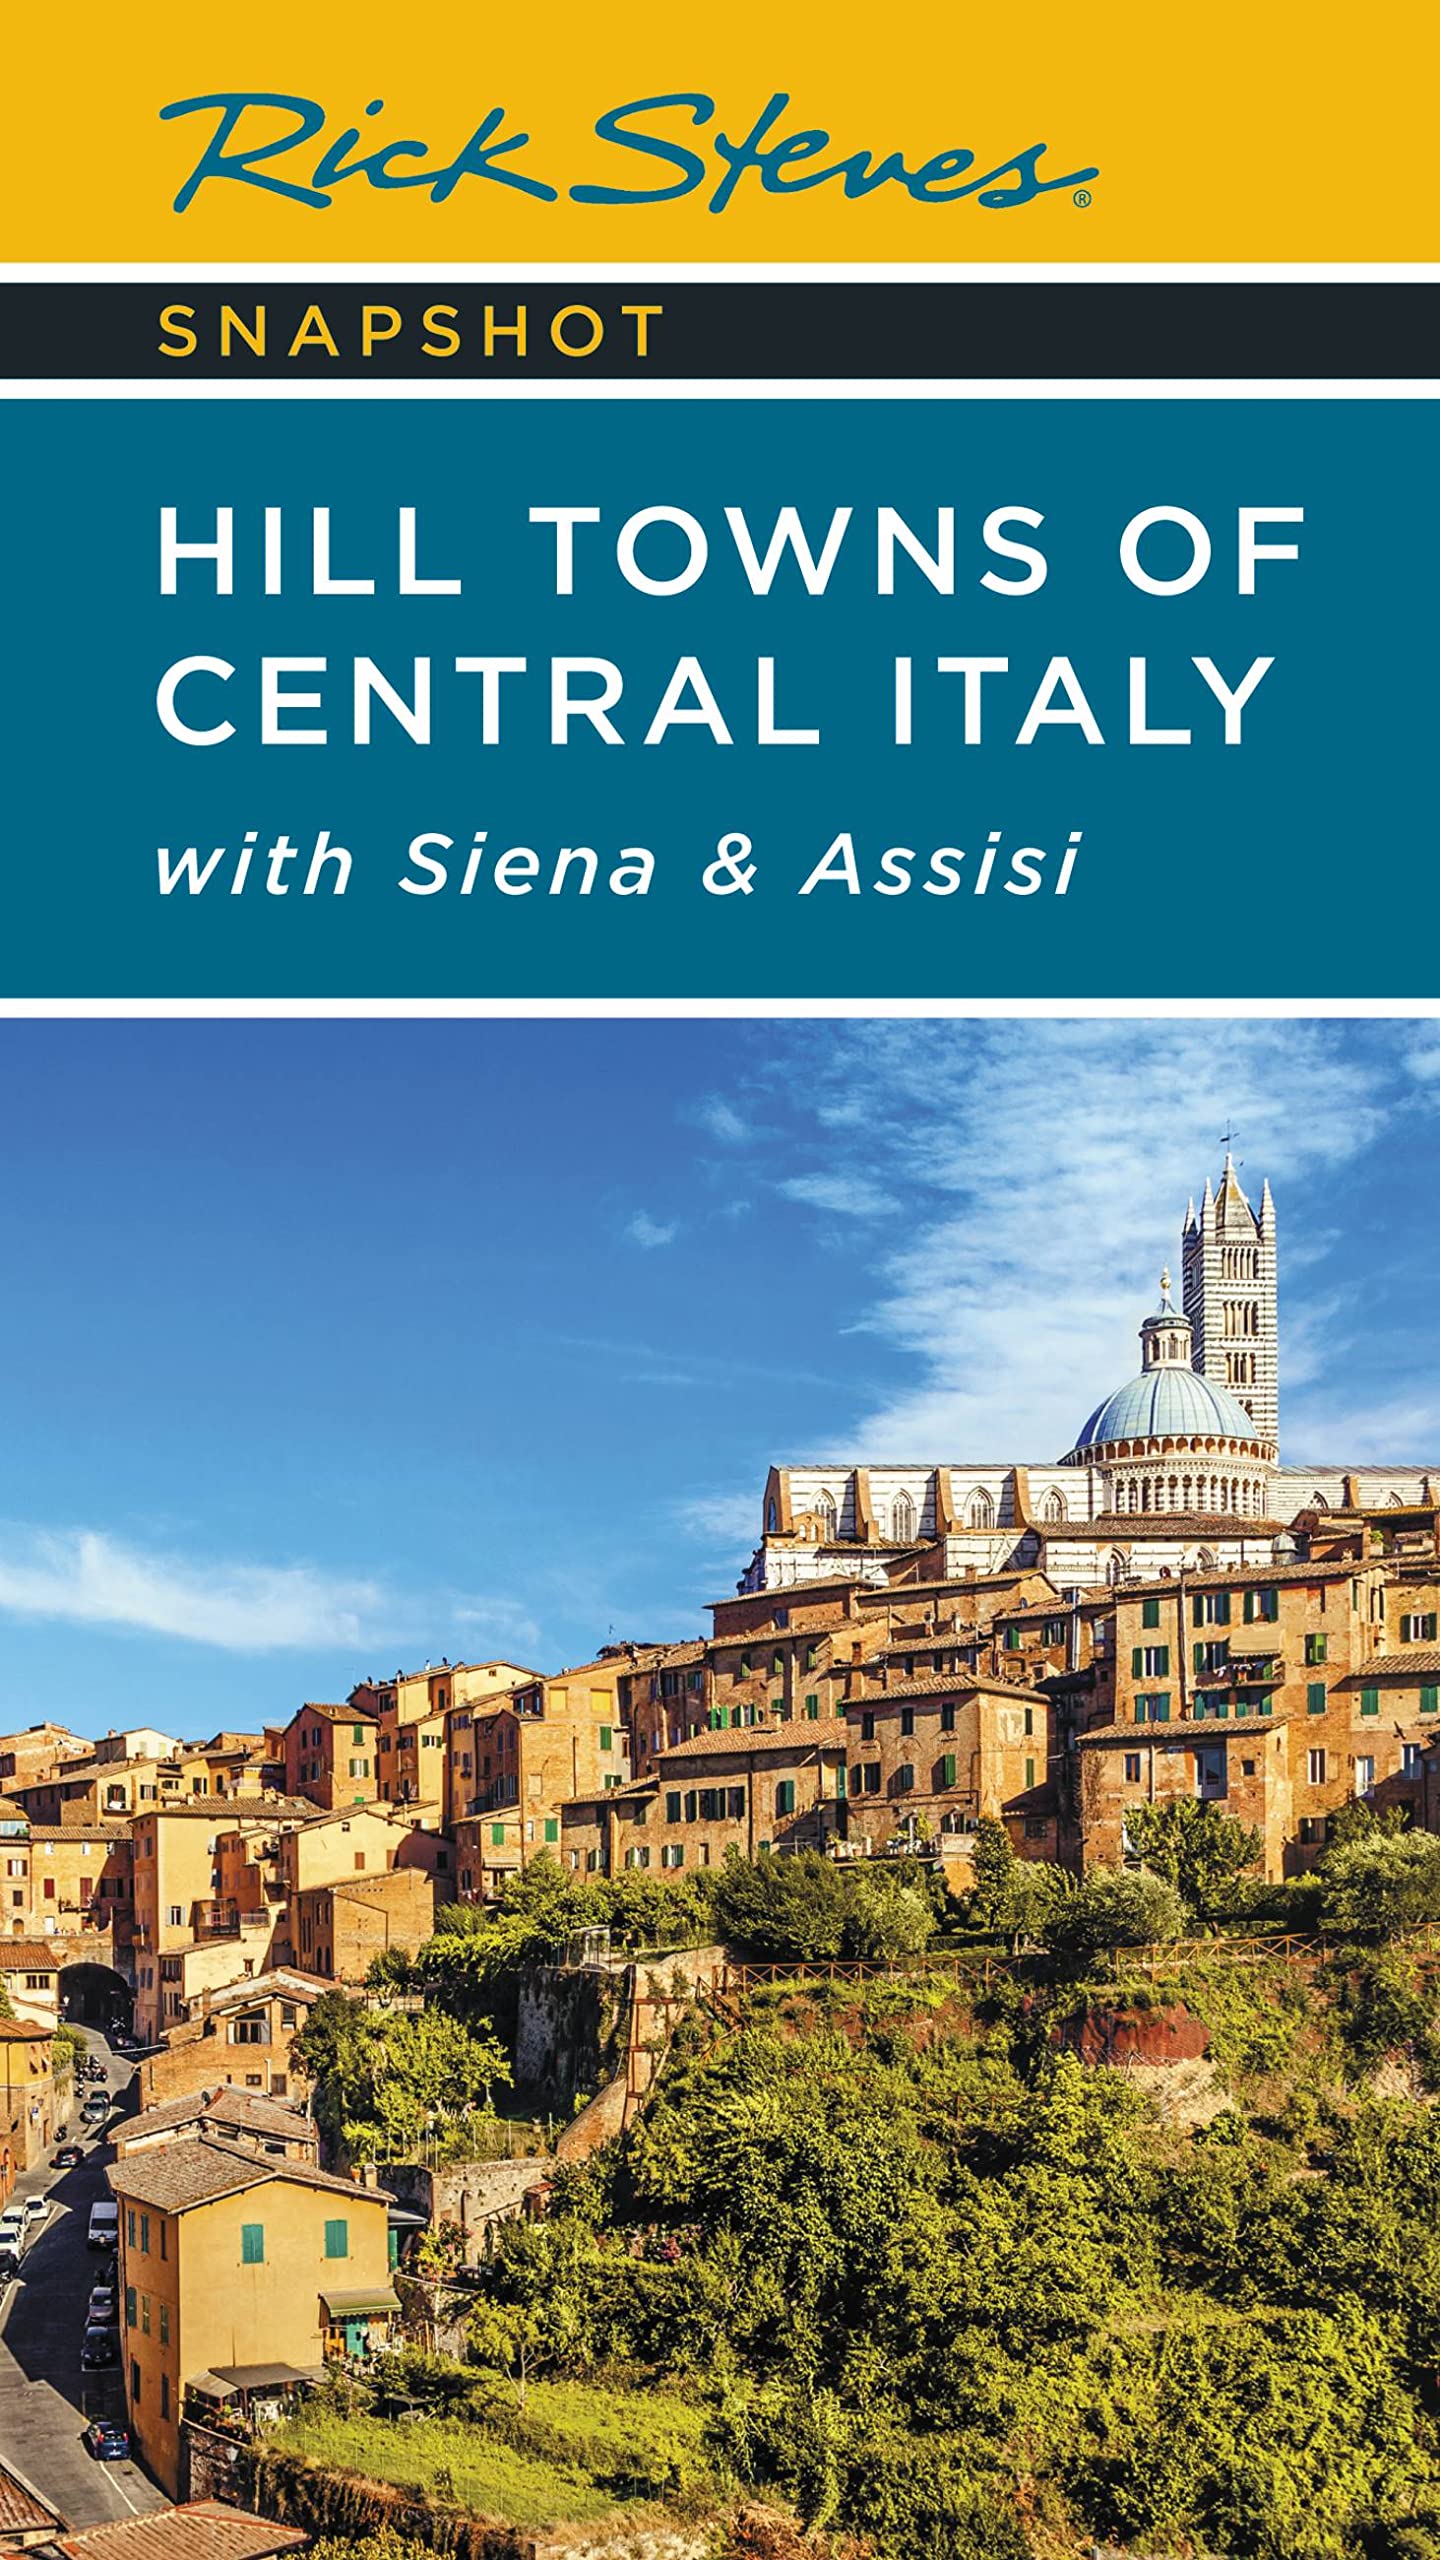 Hill Towns of Central Italy Travel Guide - Rick Steves - 2023